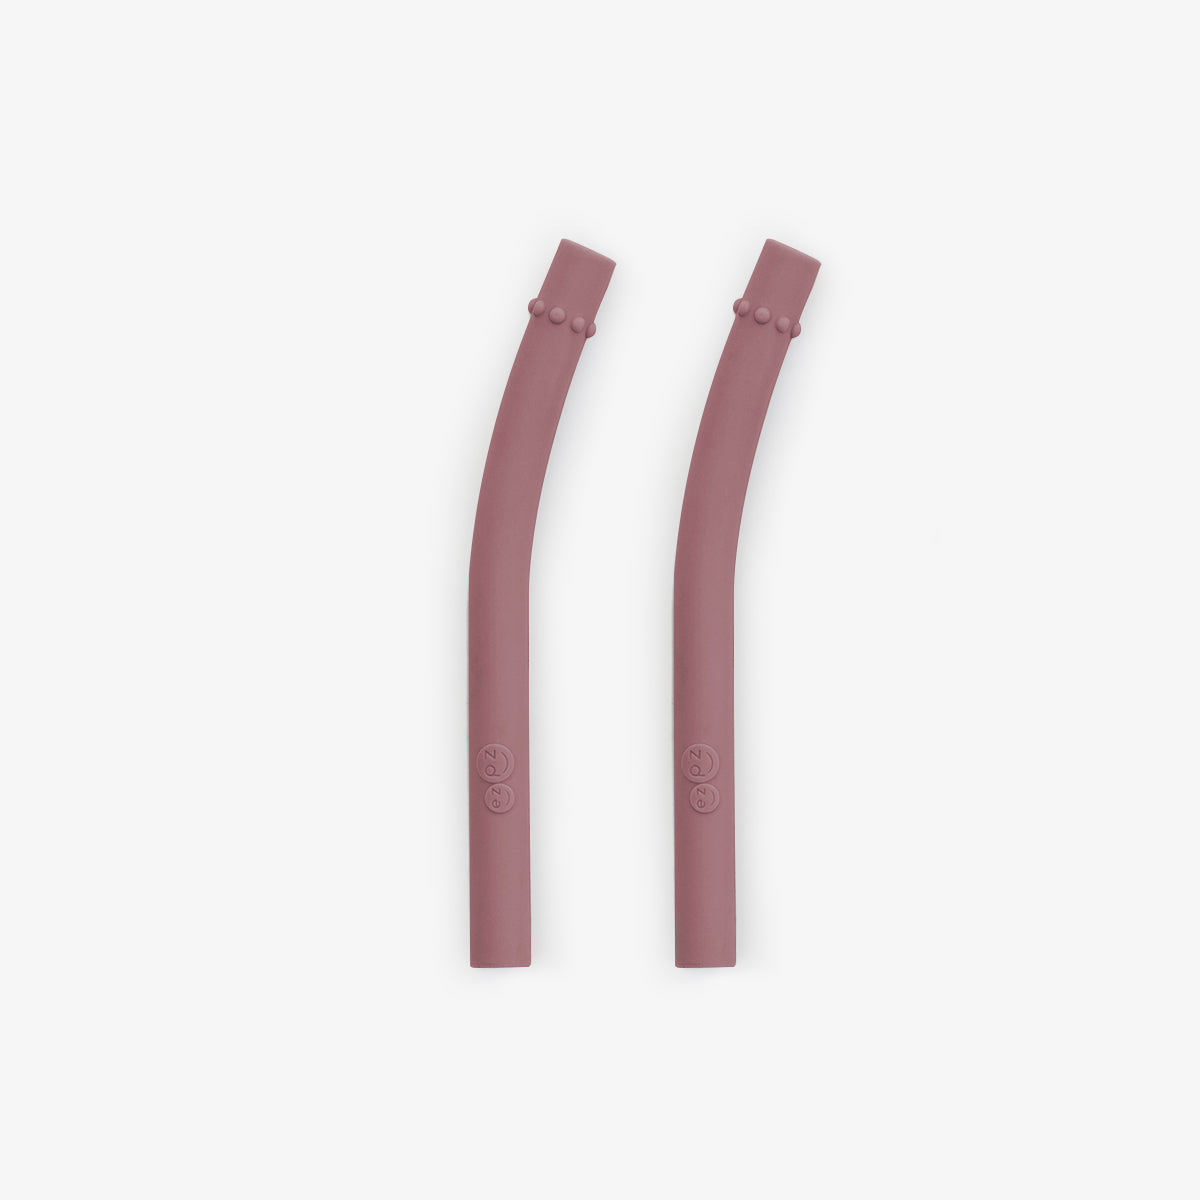 Mini Straws in Mauve / Silicone Straw Replacement Pack for the ezpz Mini Cup & Straw System